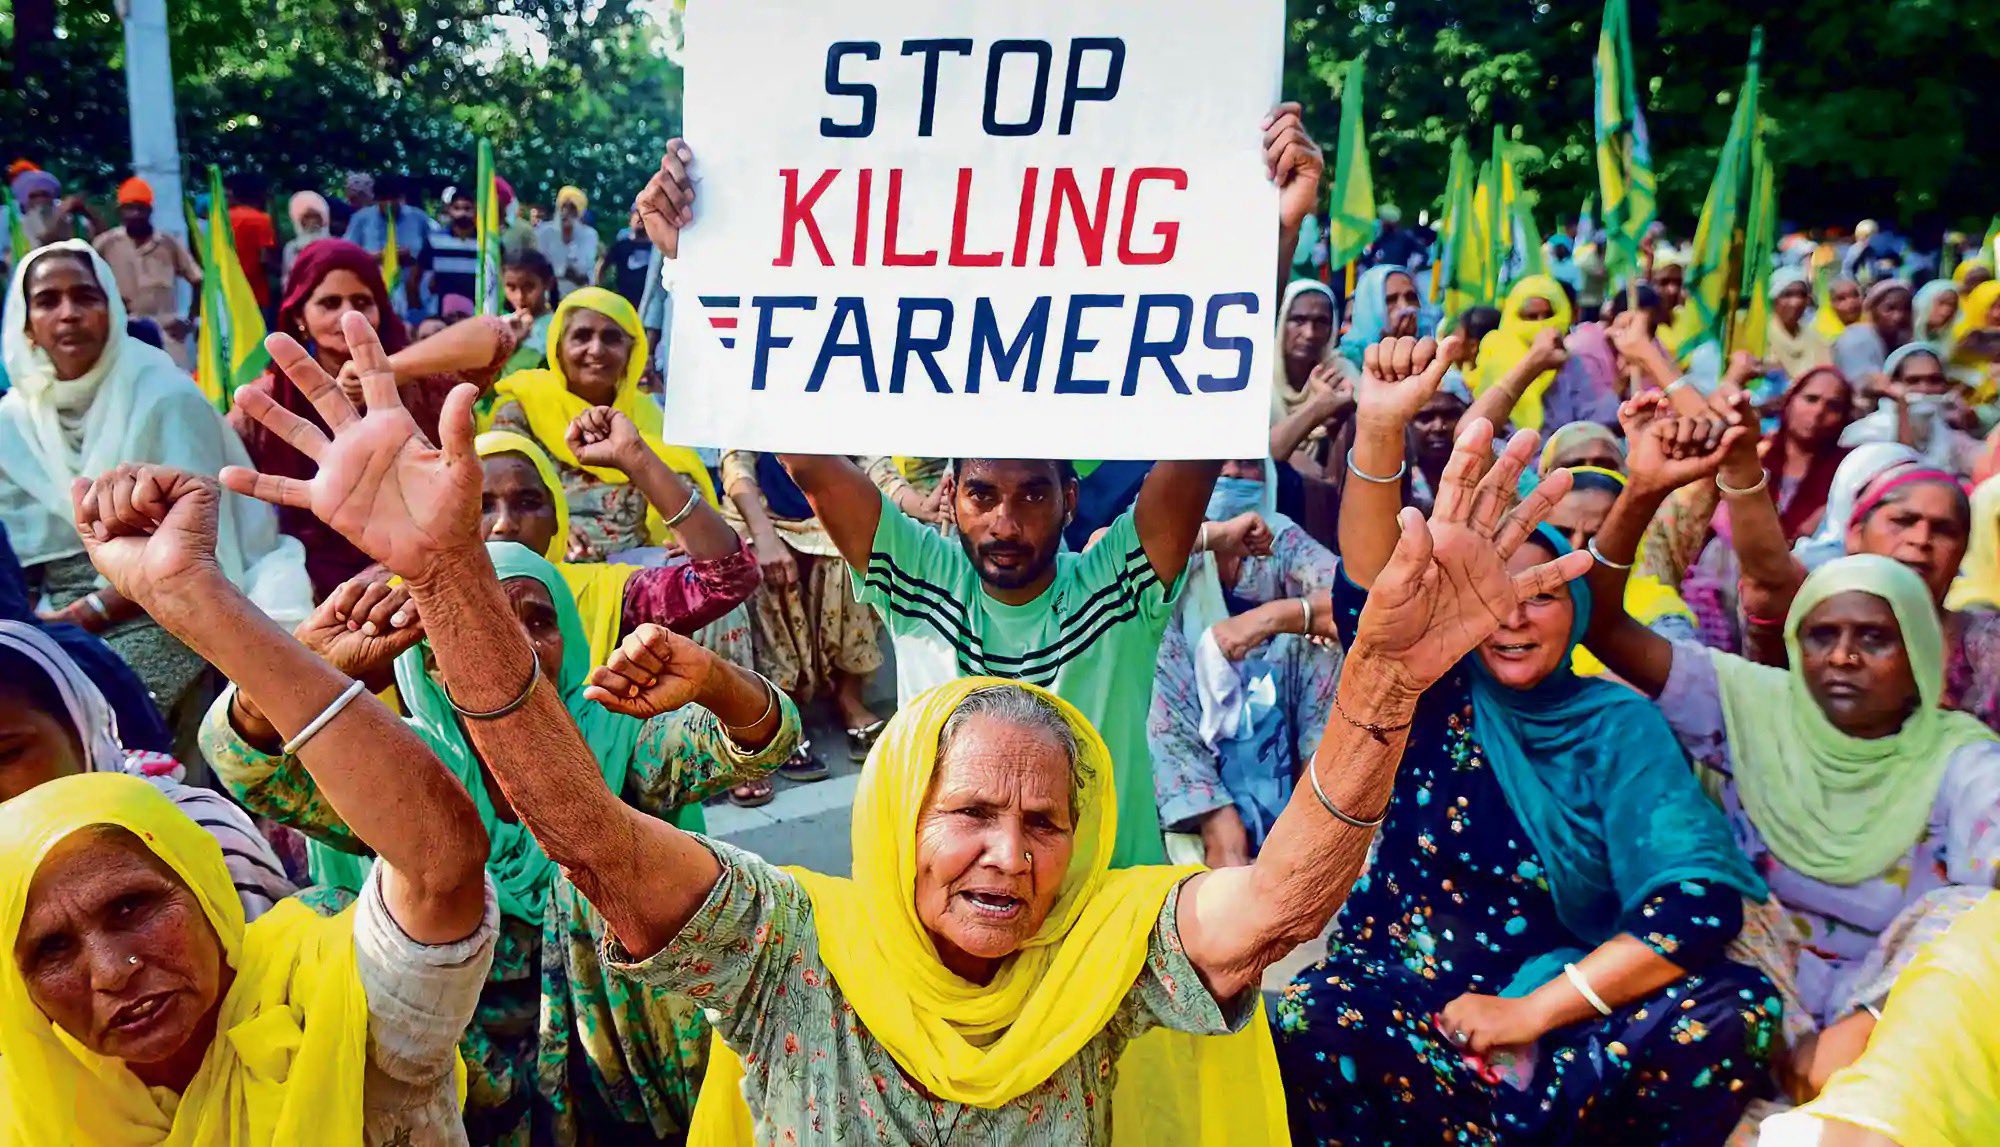 What in the human rights violations is going on?! They cut the internet around New Delhi?! #FarmersProtest